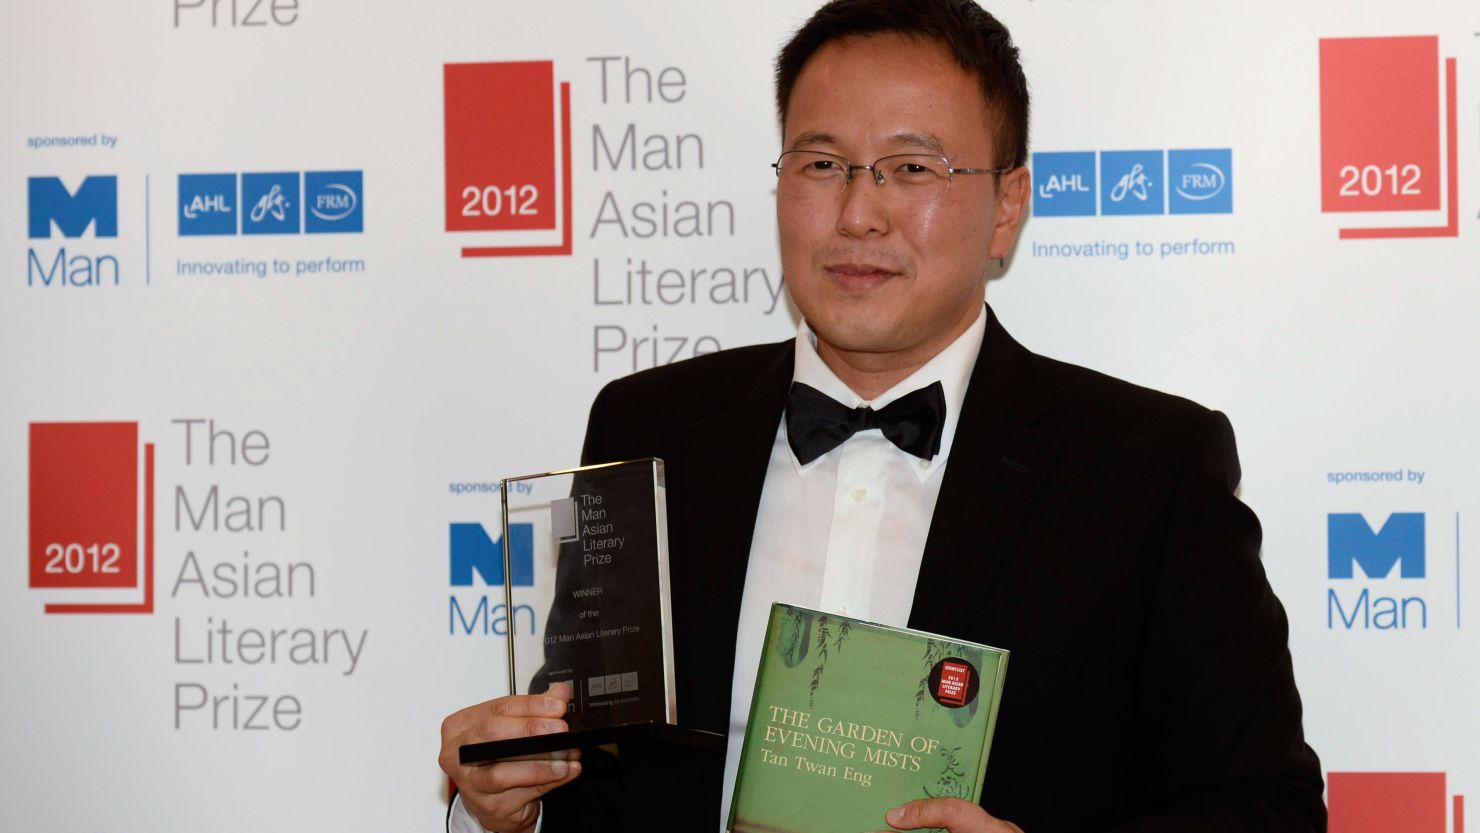 Tan Twan Eng  won the $30,000 literary prize for his novel set in the aftermath of the Japanese occupation of Malaysia